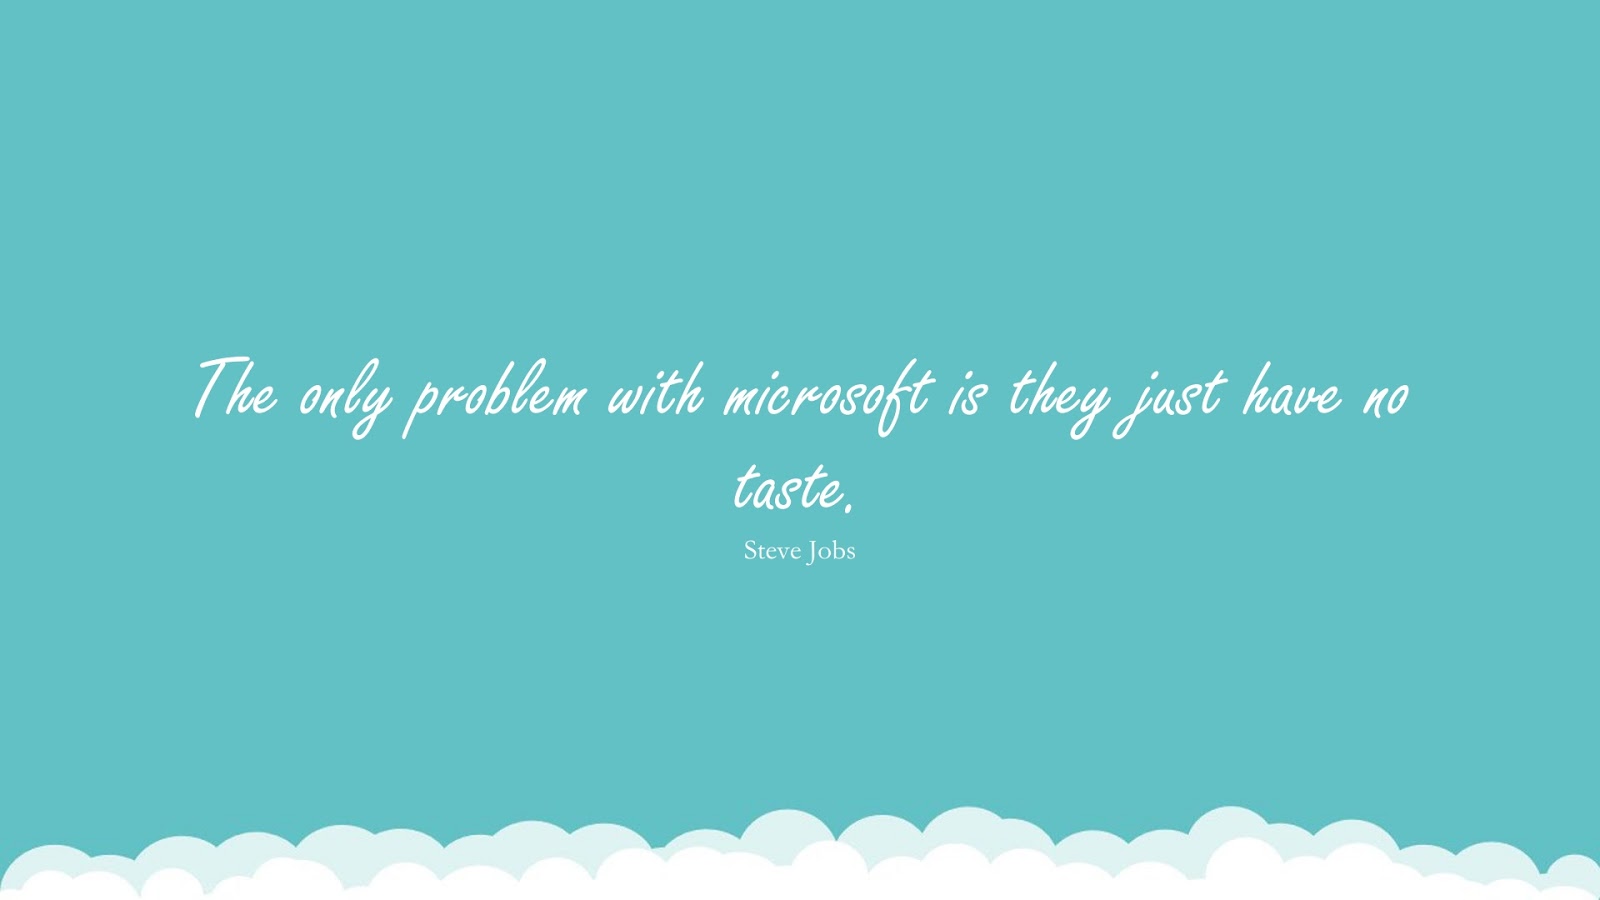 The only problem with microsoft is they just have no taste. (Steve Jobs);  #SteveJobsQuotesandSayings